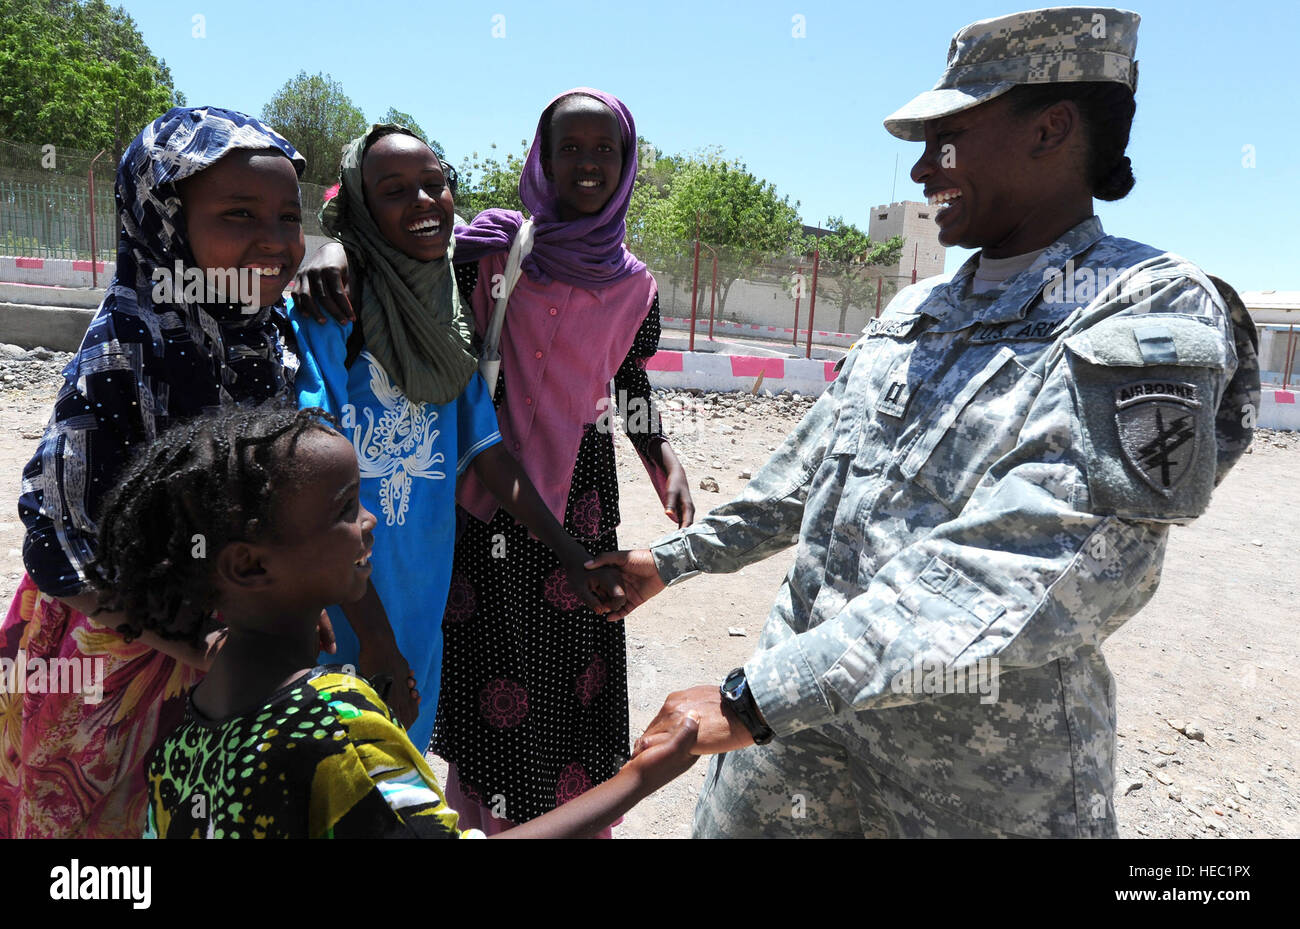 110419-F-XM360-102        U.S. Army Capt. Courtney Sanders (right), with the 402nd Civil Affairs Battalion, laughs with a group of girls in front of the Dikhil High School in Dikhil, Djibouti, on April 19, 2011.  The Battalion was working on renovating the school.  The project, which began April 16, is scheduled to refurbish six classrooms, the school's roof and an office.  DoD photo by Master Sgt. Dawn Price, U.S. Air Force.  (Released) Stock Photo